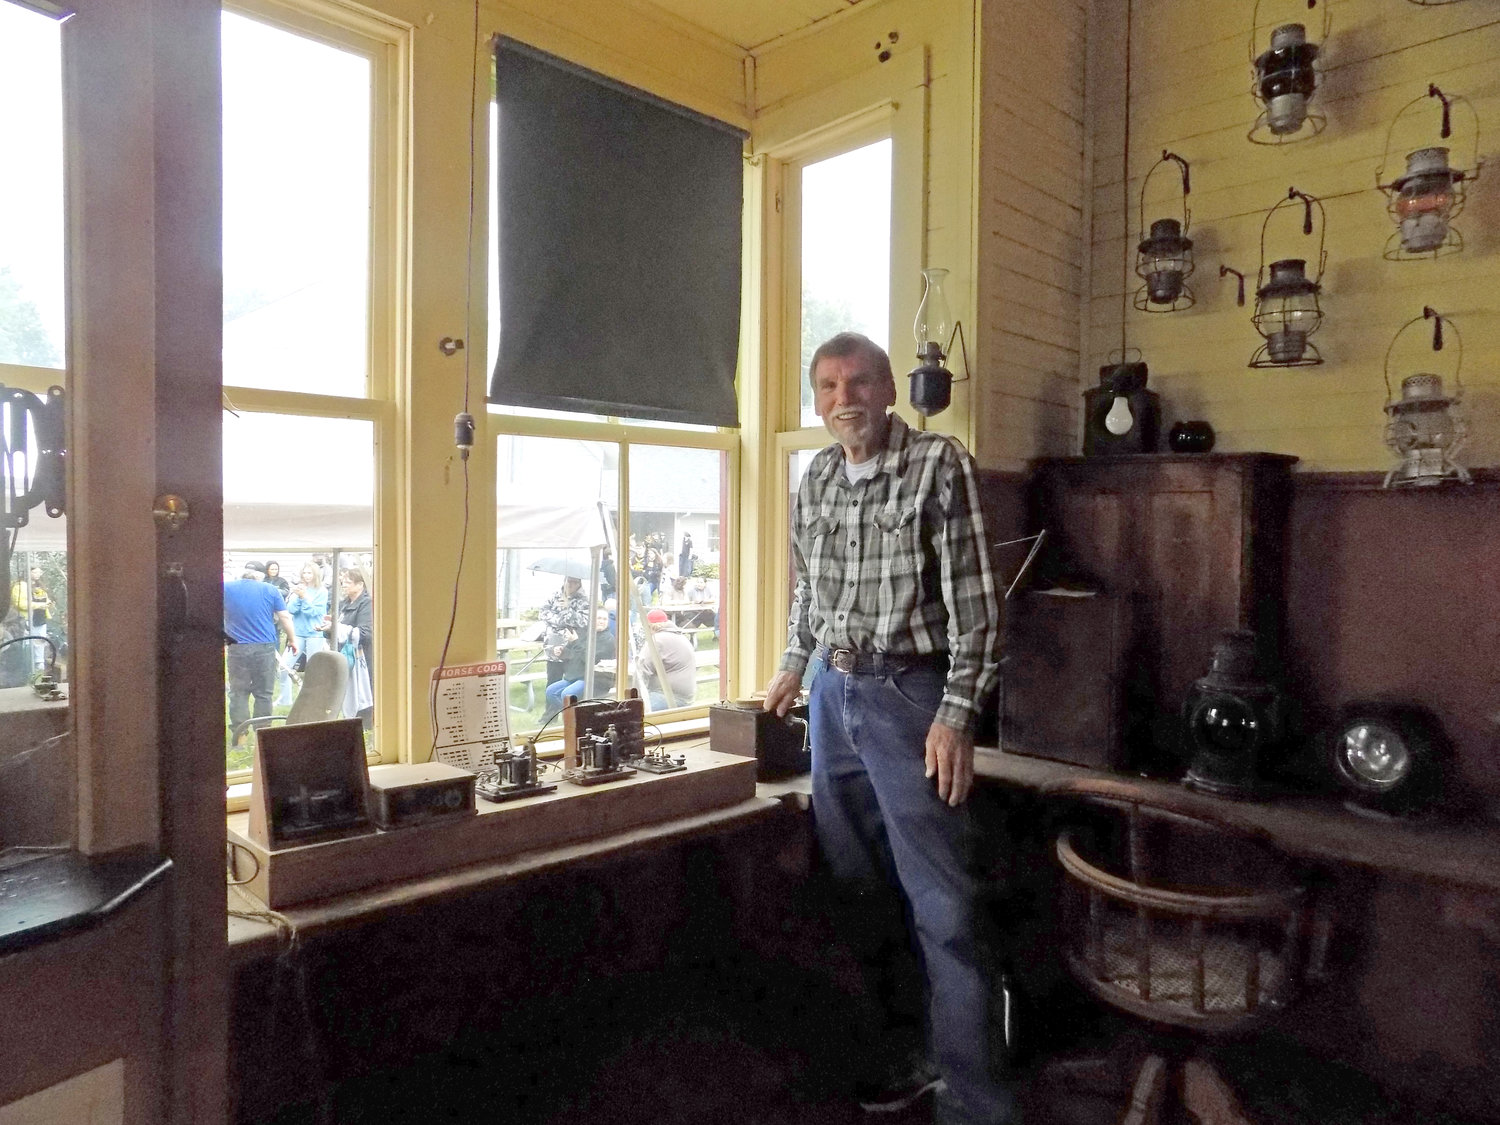 Jim Miller demonstrated the working telegraph machine inside the Depot.